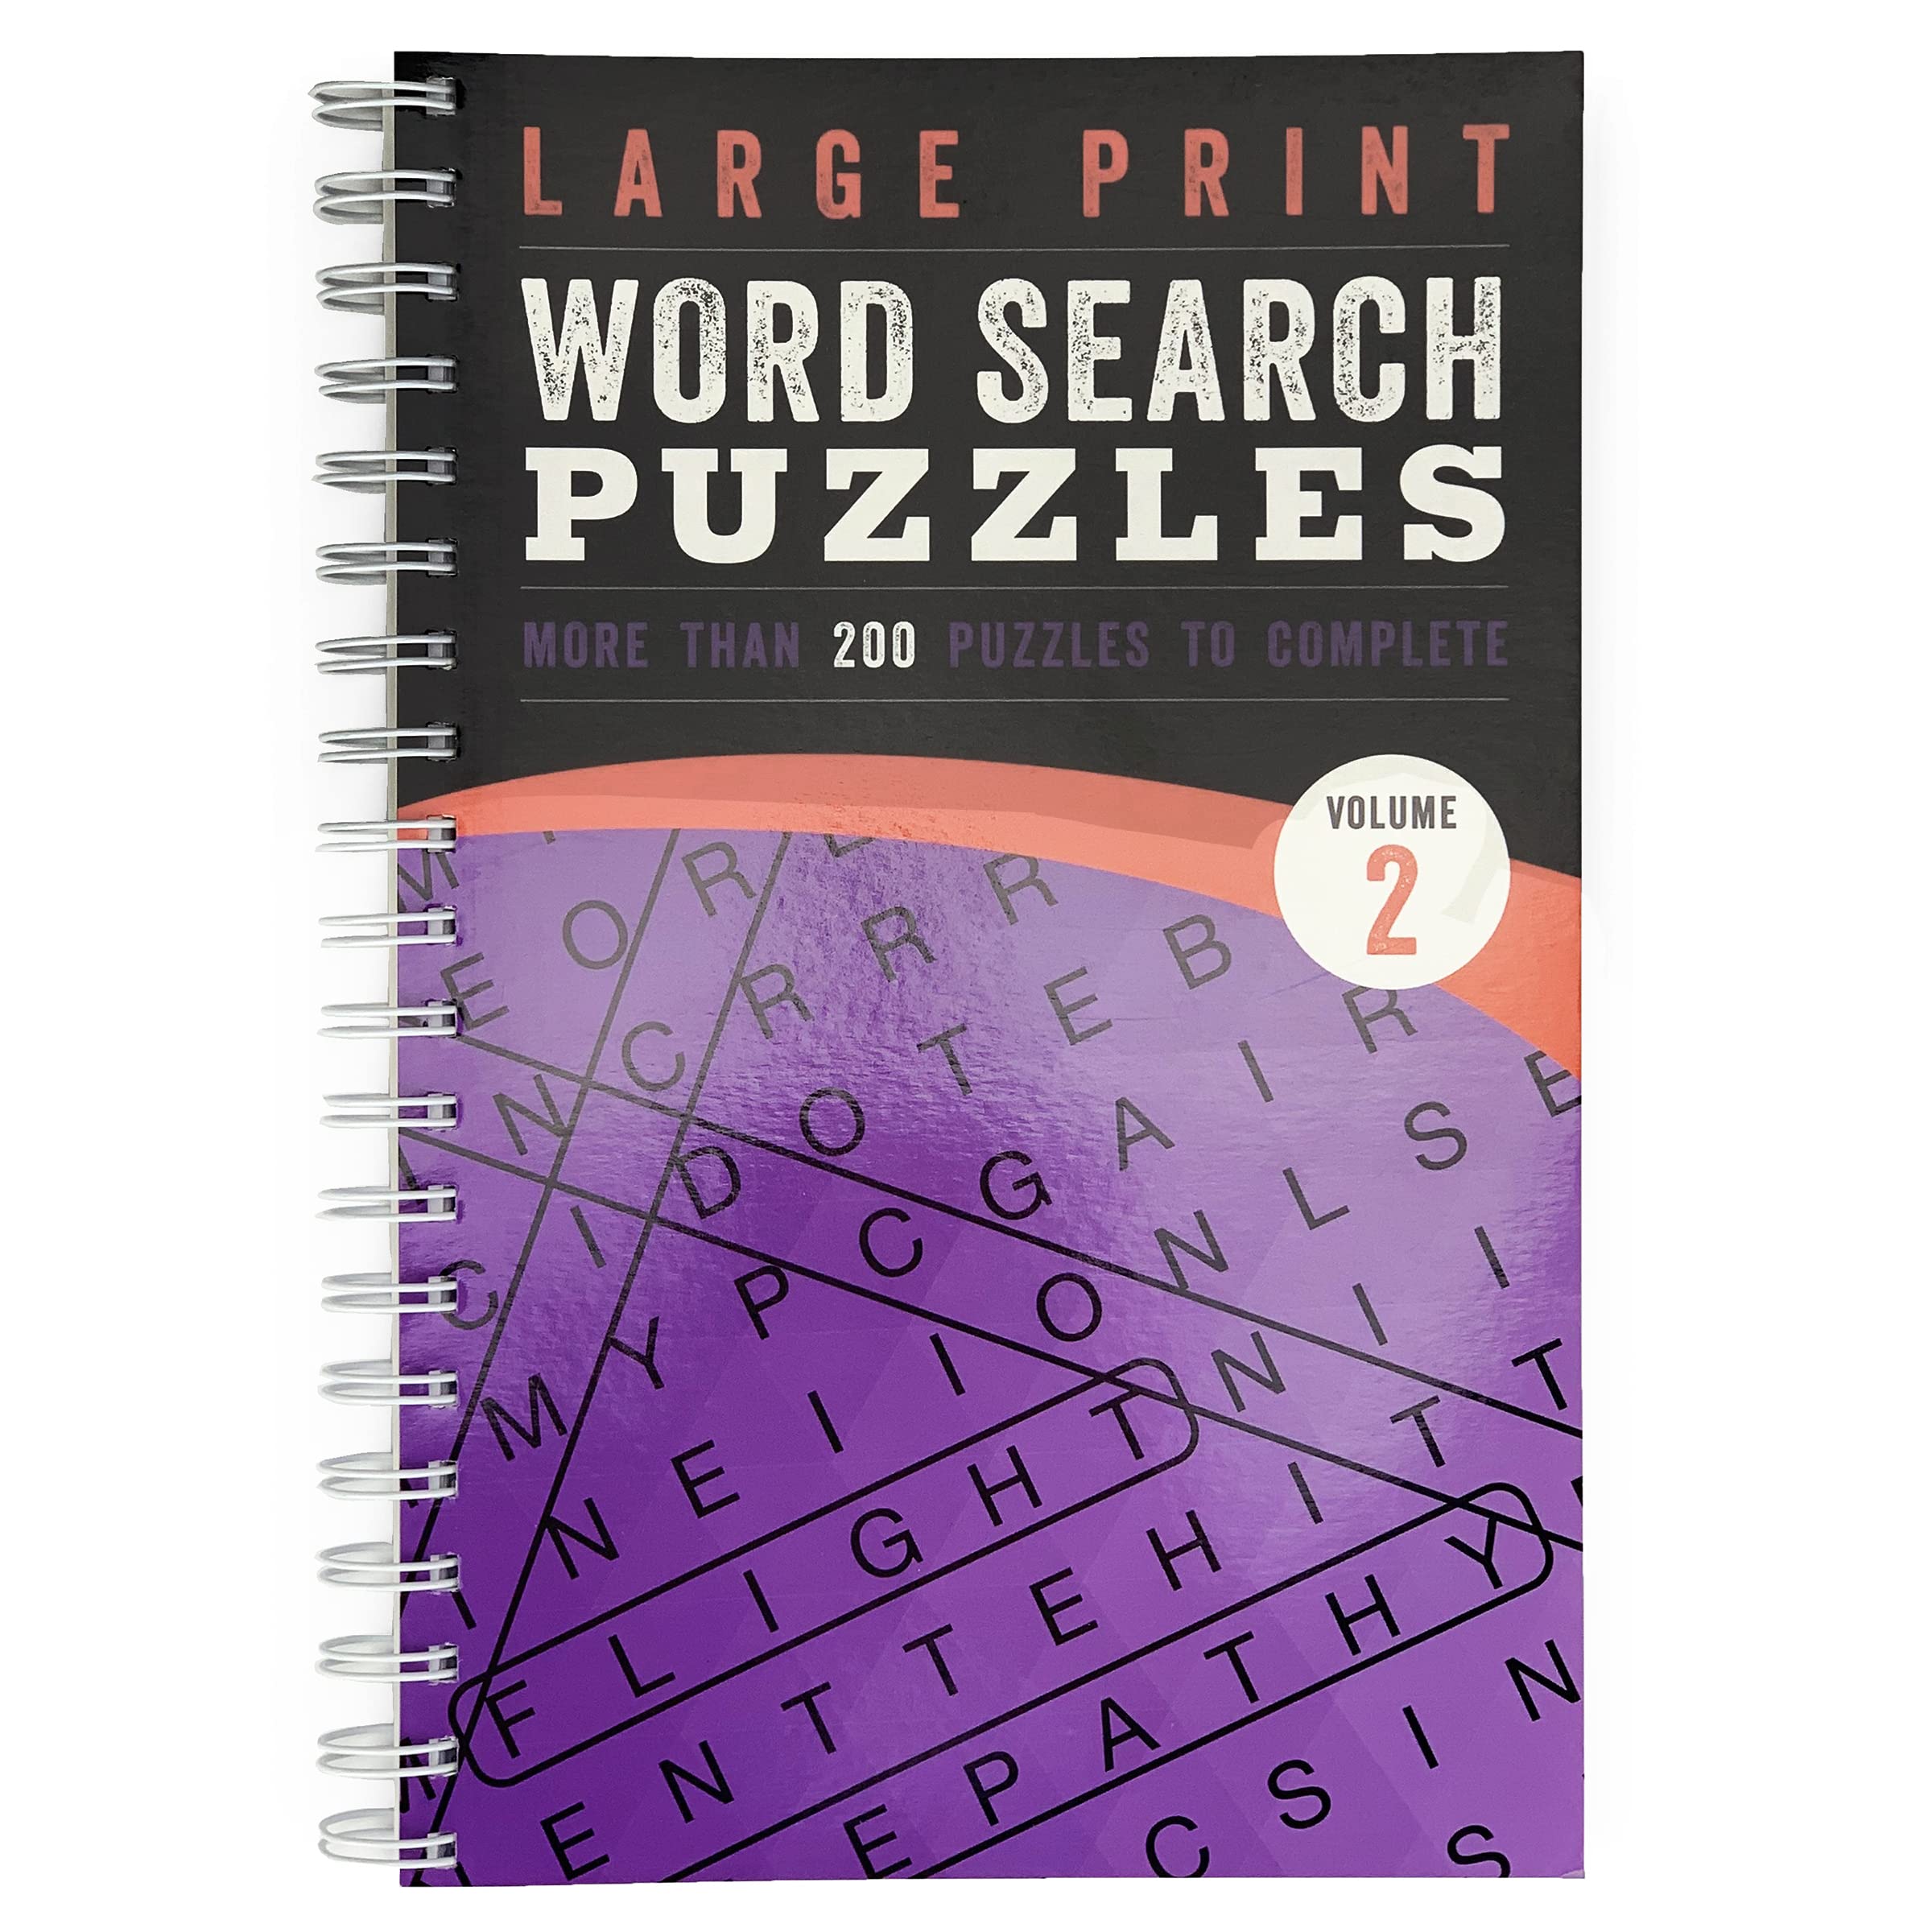 Large Print Word Search Puzzles: Volume 2 by Parragon Books